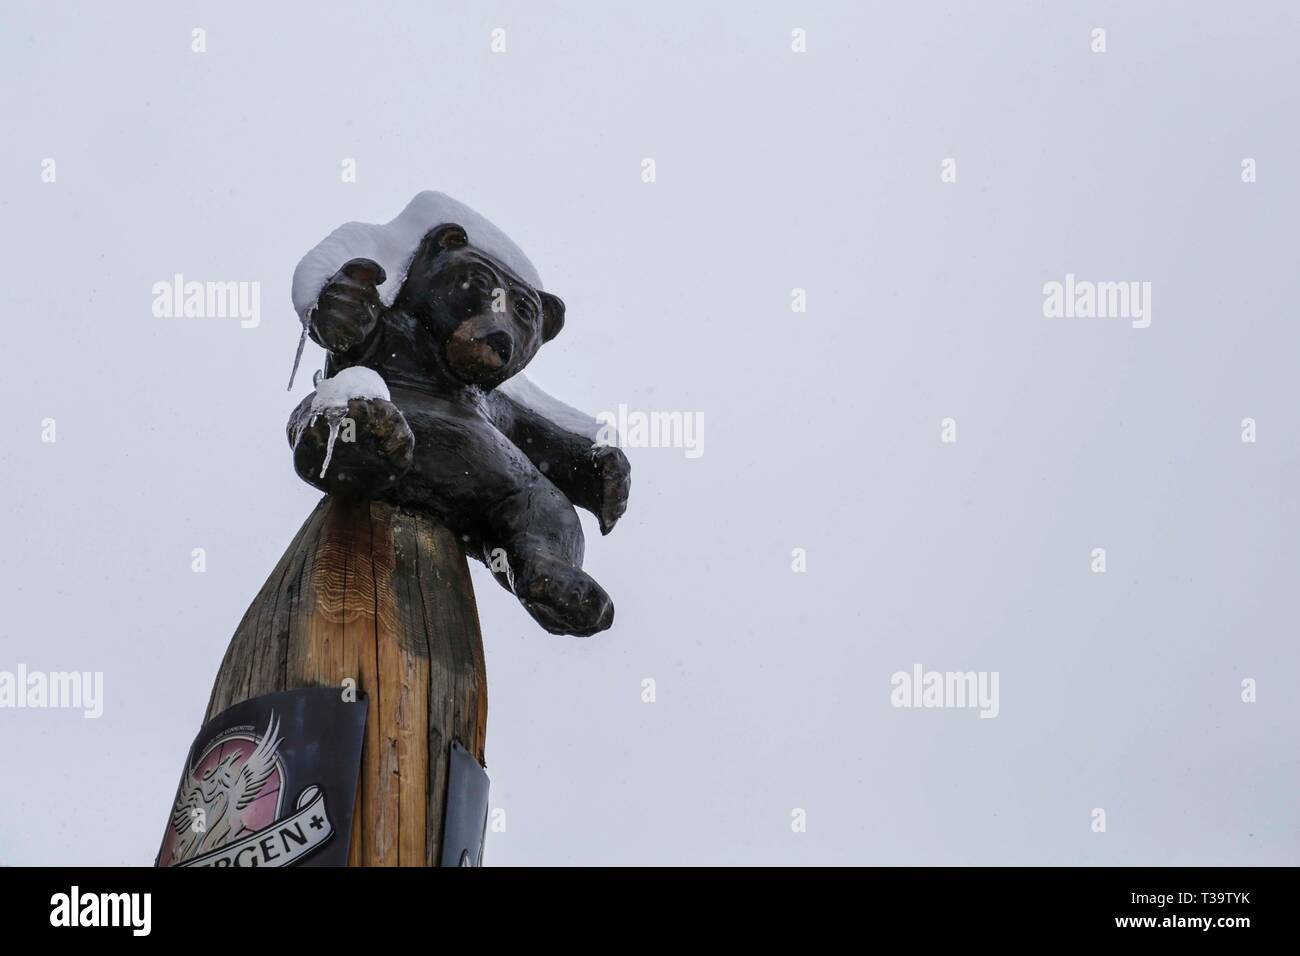 Grizzly's bar wood carvings, Tignes Le Lac/ Tignes 2100, France Stock Photo